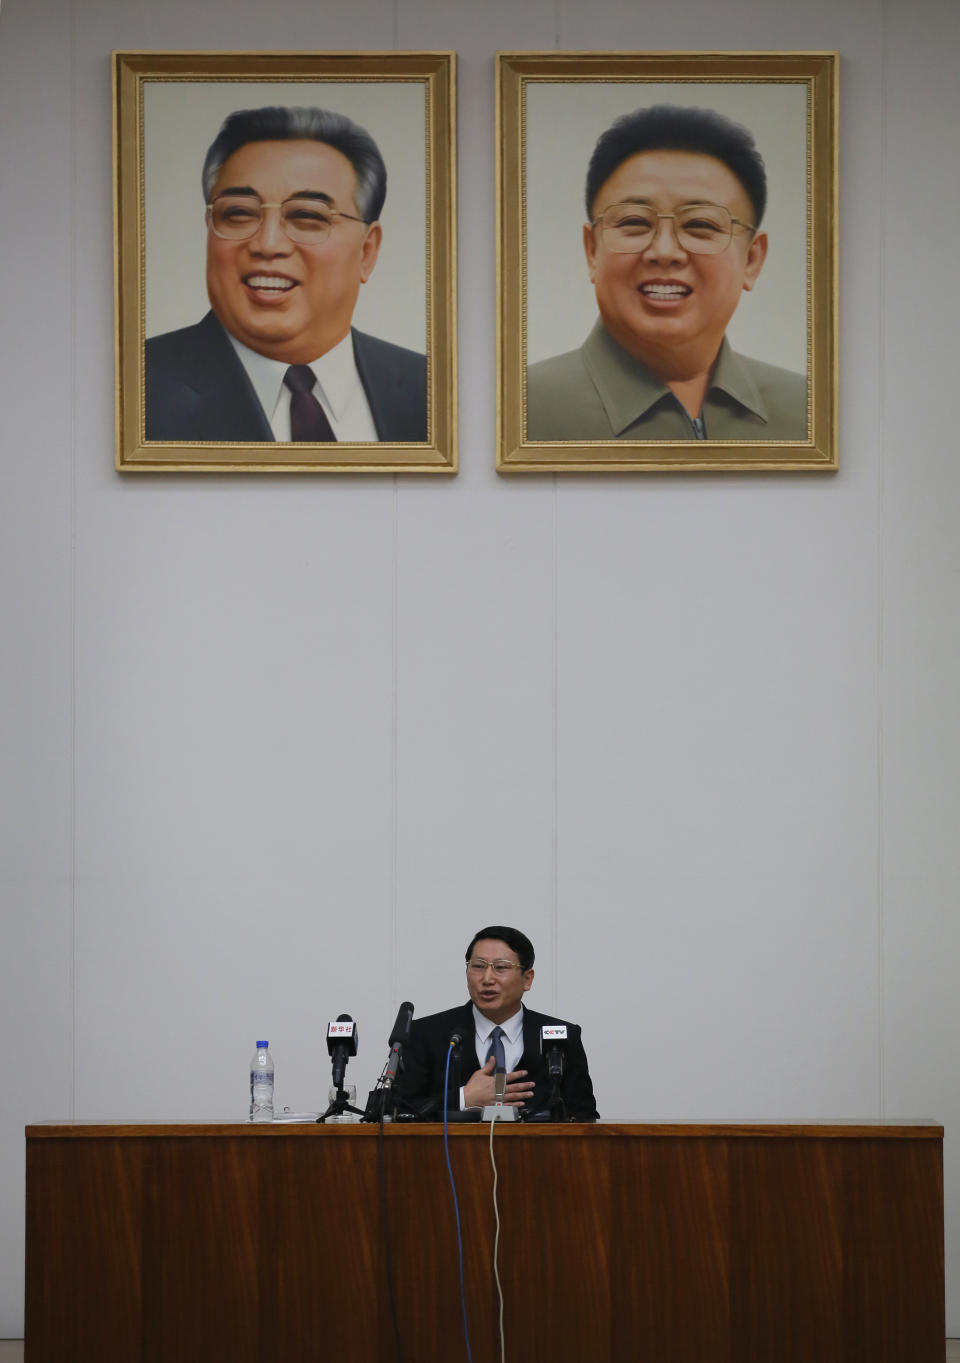 Kim Jung Wook, a South Korean Baptist missionary speaks under the portrait of late leaders Kim Il Sung and Kim Jong Il during a news conference in Pyongyang, North Korea, Thursday, Feb. 27, 2014. Kim who was arrested more than four months ago for allegedly trying to establish underground Christian churches in North Korea told reporters Thursday he is sorry for his ``anti-state’’ crimes and appealed to North Korean authorities to show him mercy by releasing him from their custody. (AP Photo/Vincent Yu)